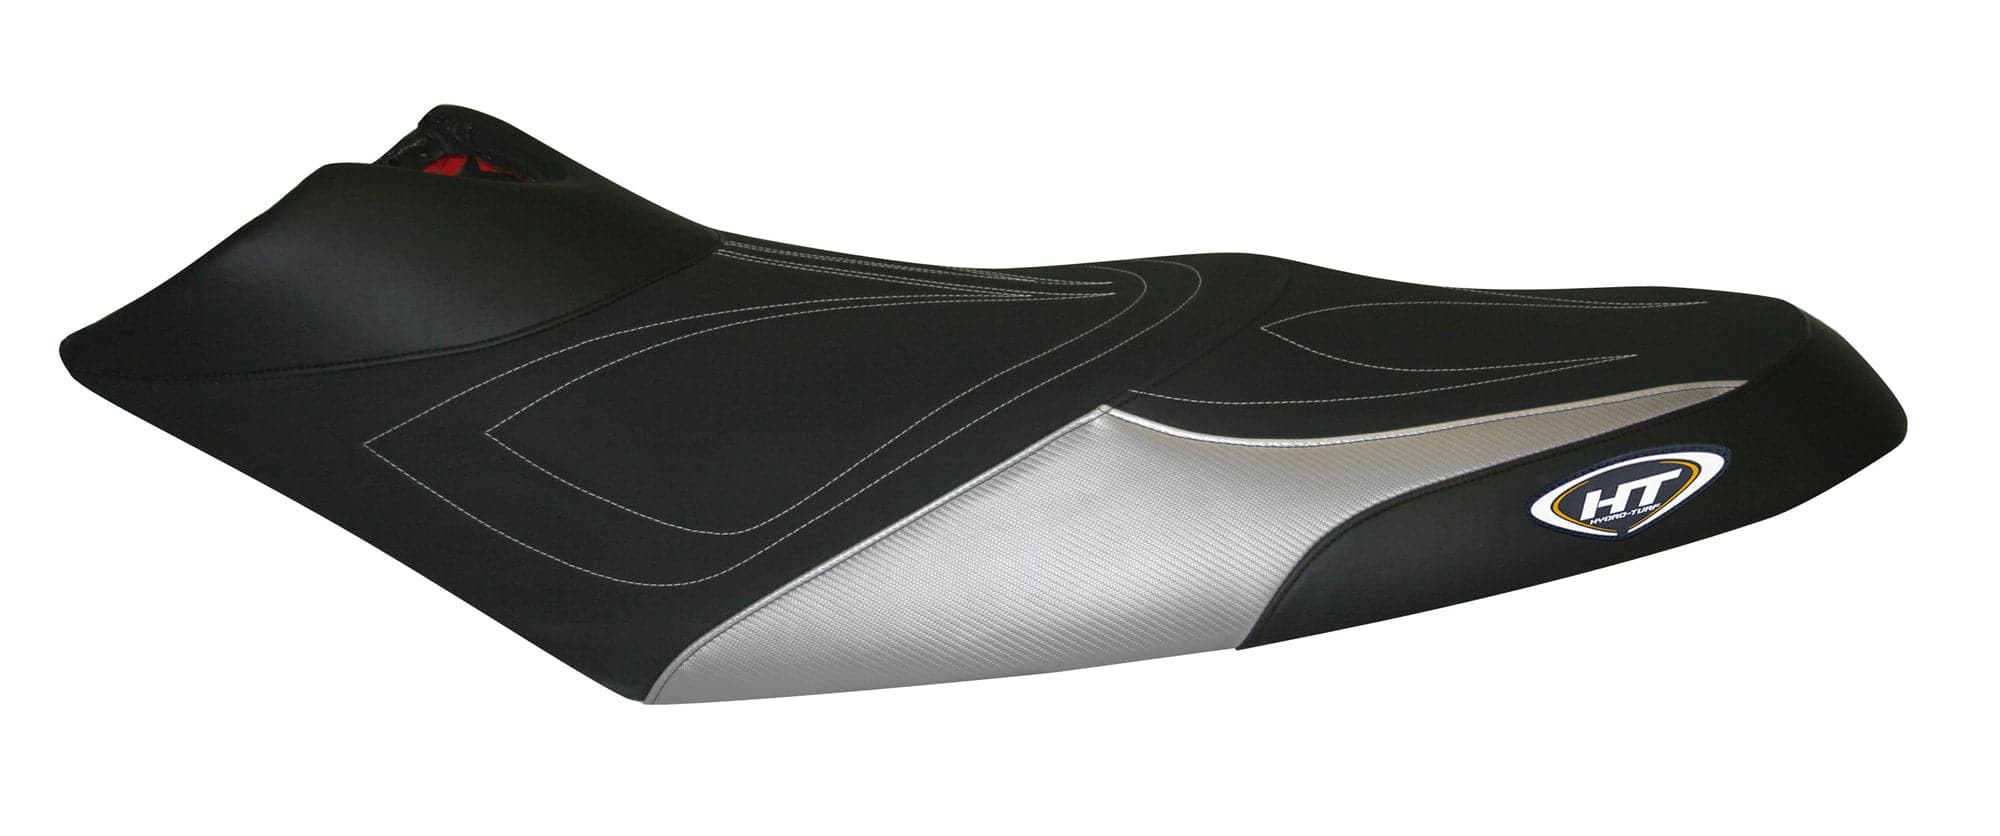 Hydro-Turf Premier Seat Cover for Sea Doo RXP (04-08) Colorway B